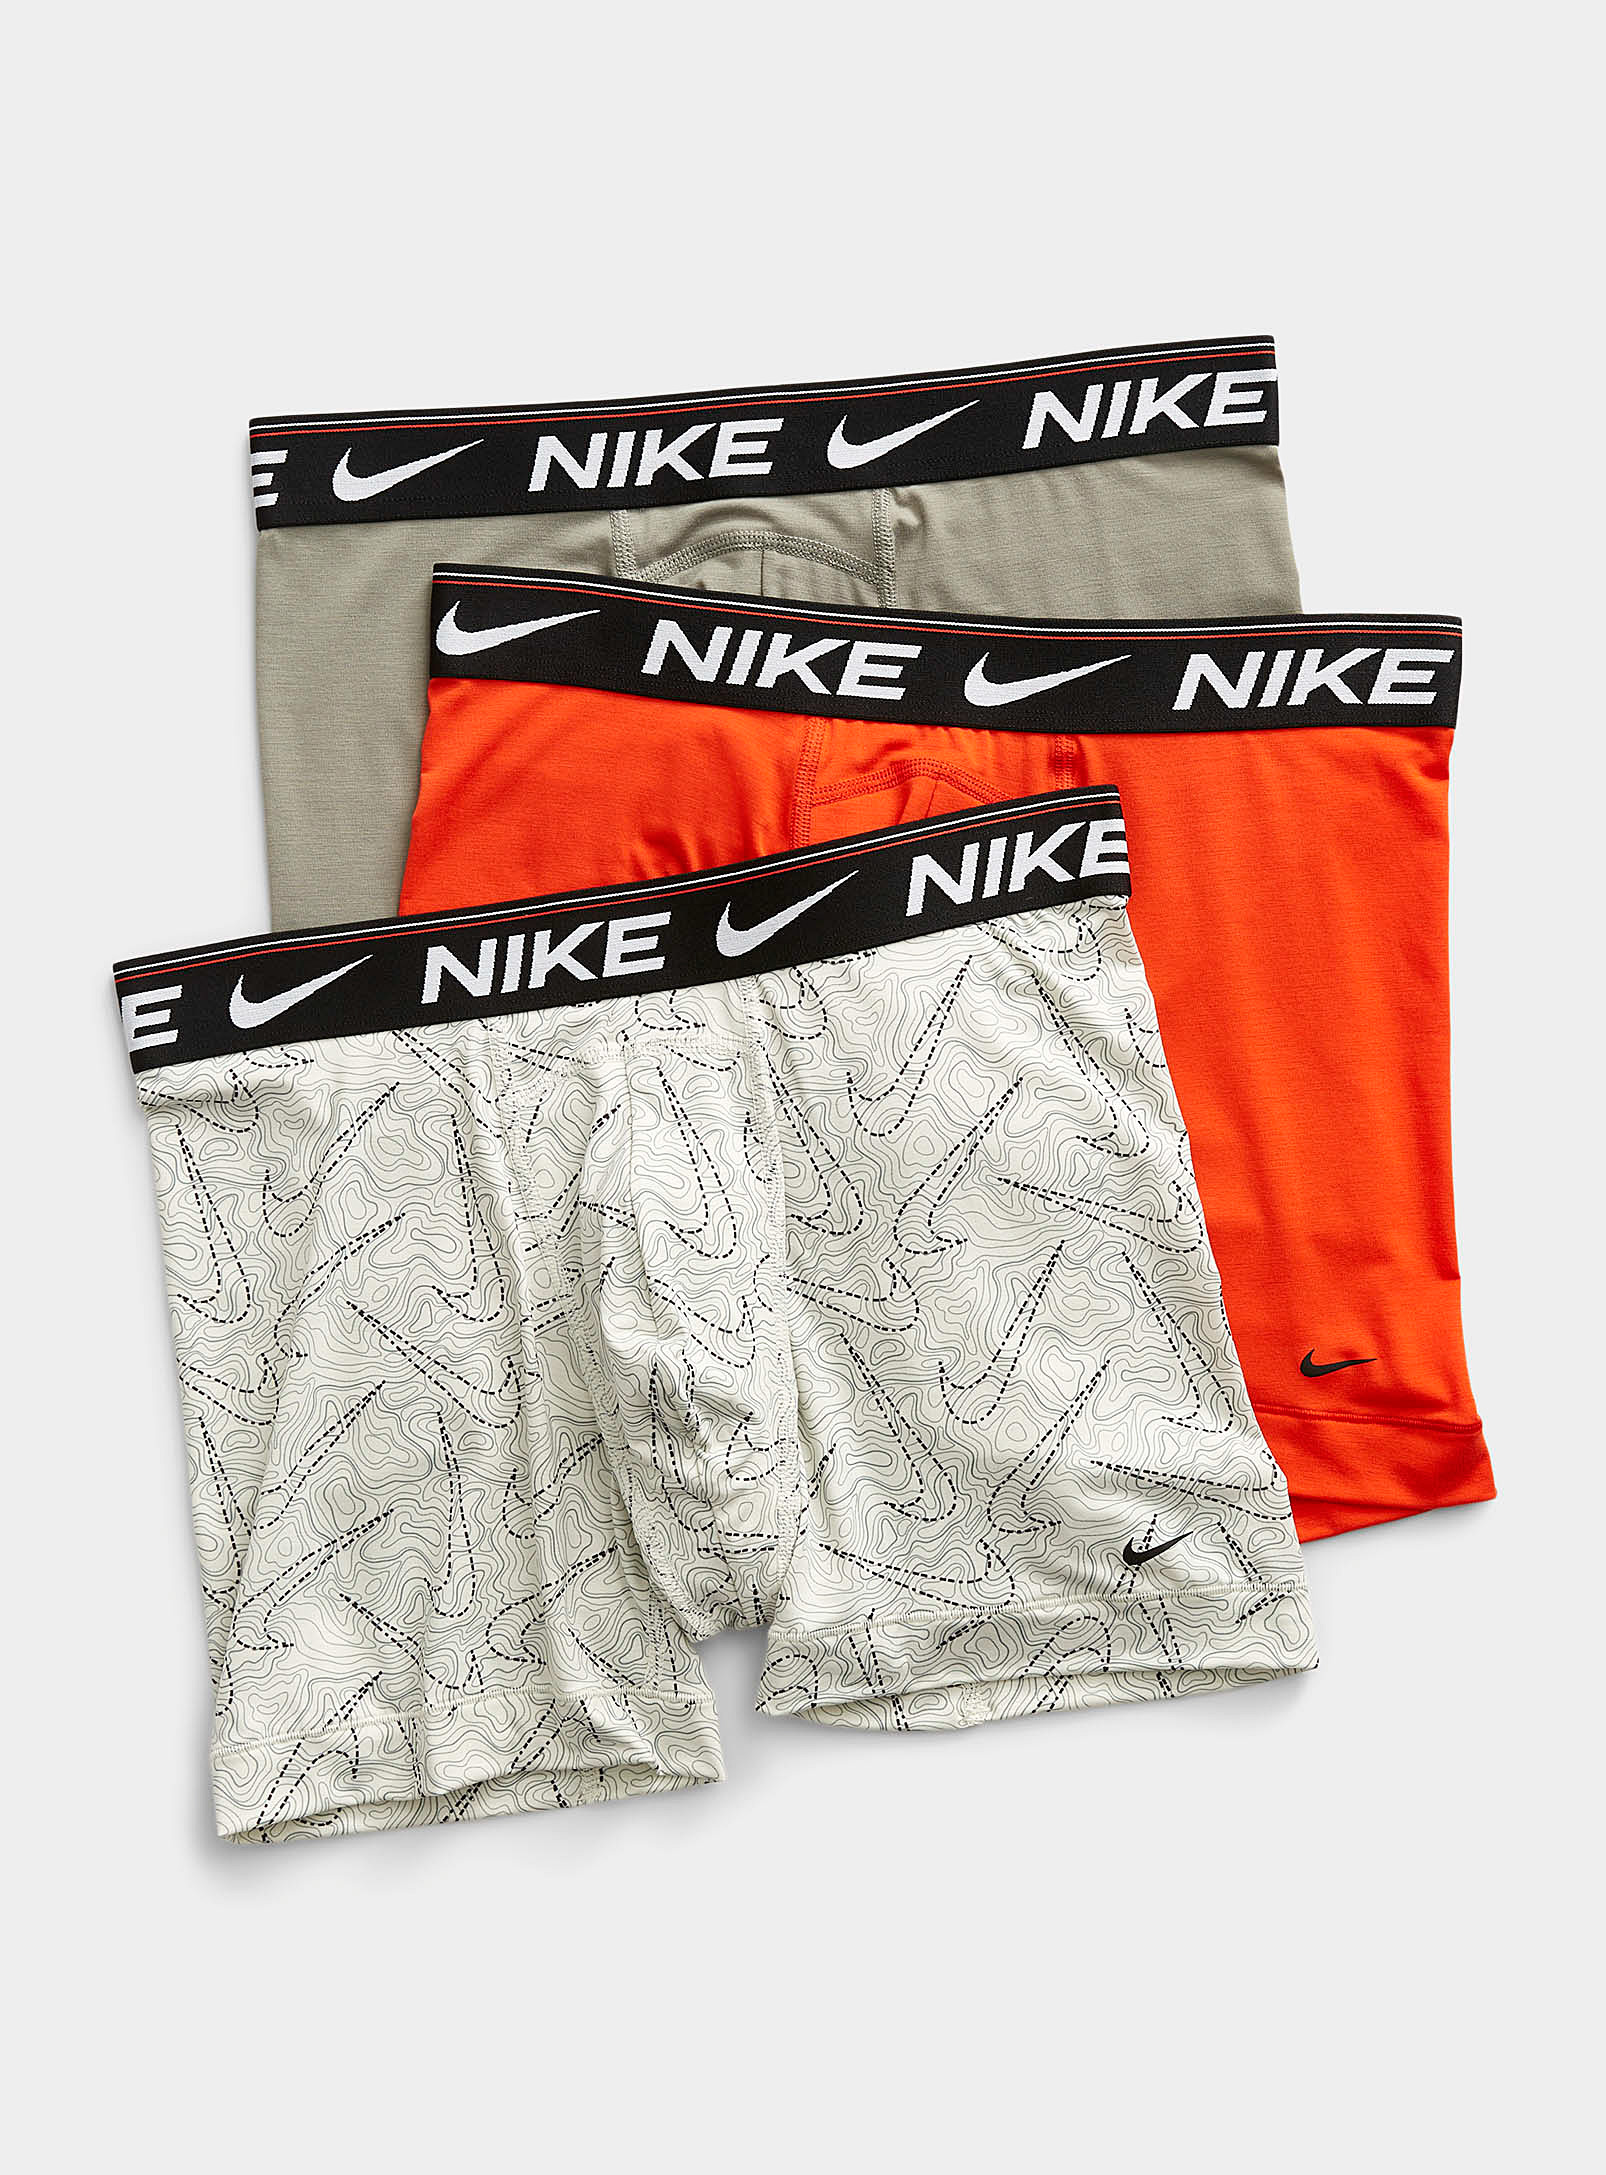 Nike - Men's Solid and patterned Dri-FIT Ultra Comfort boxer briefs 3-pack